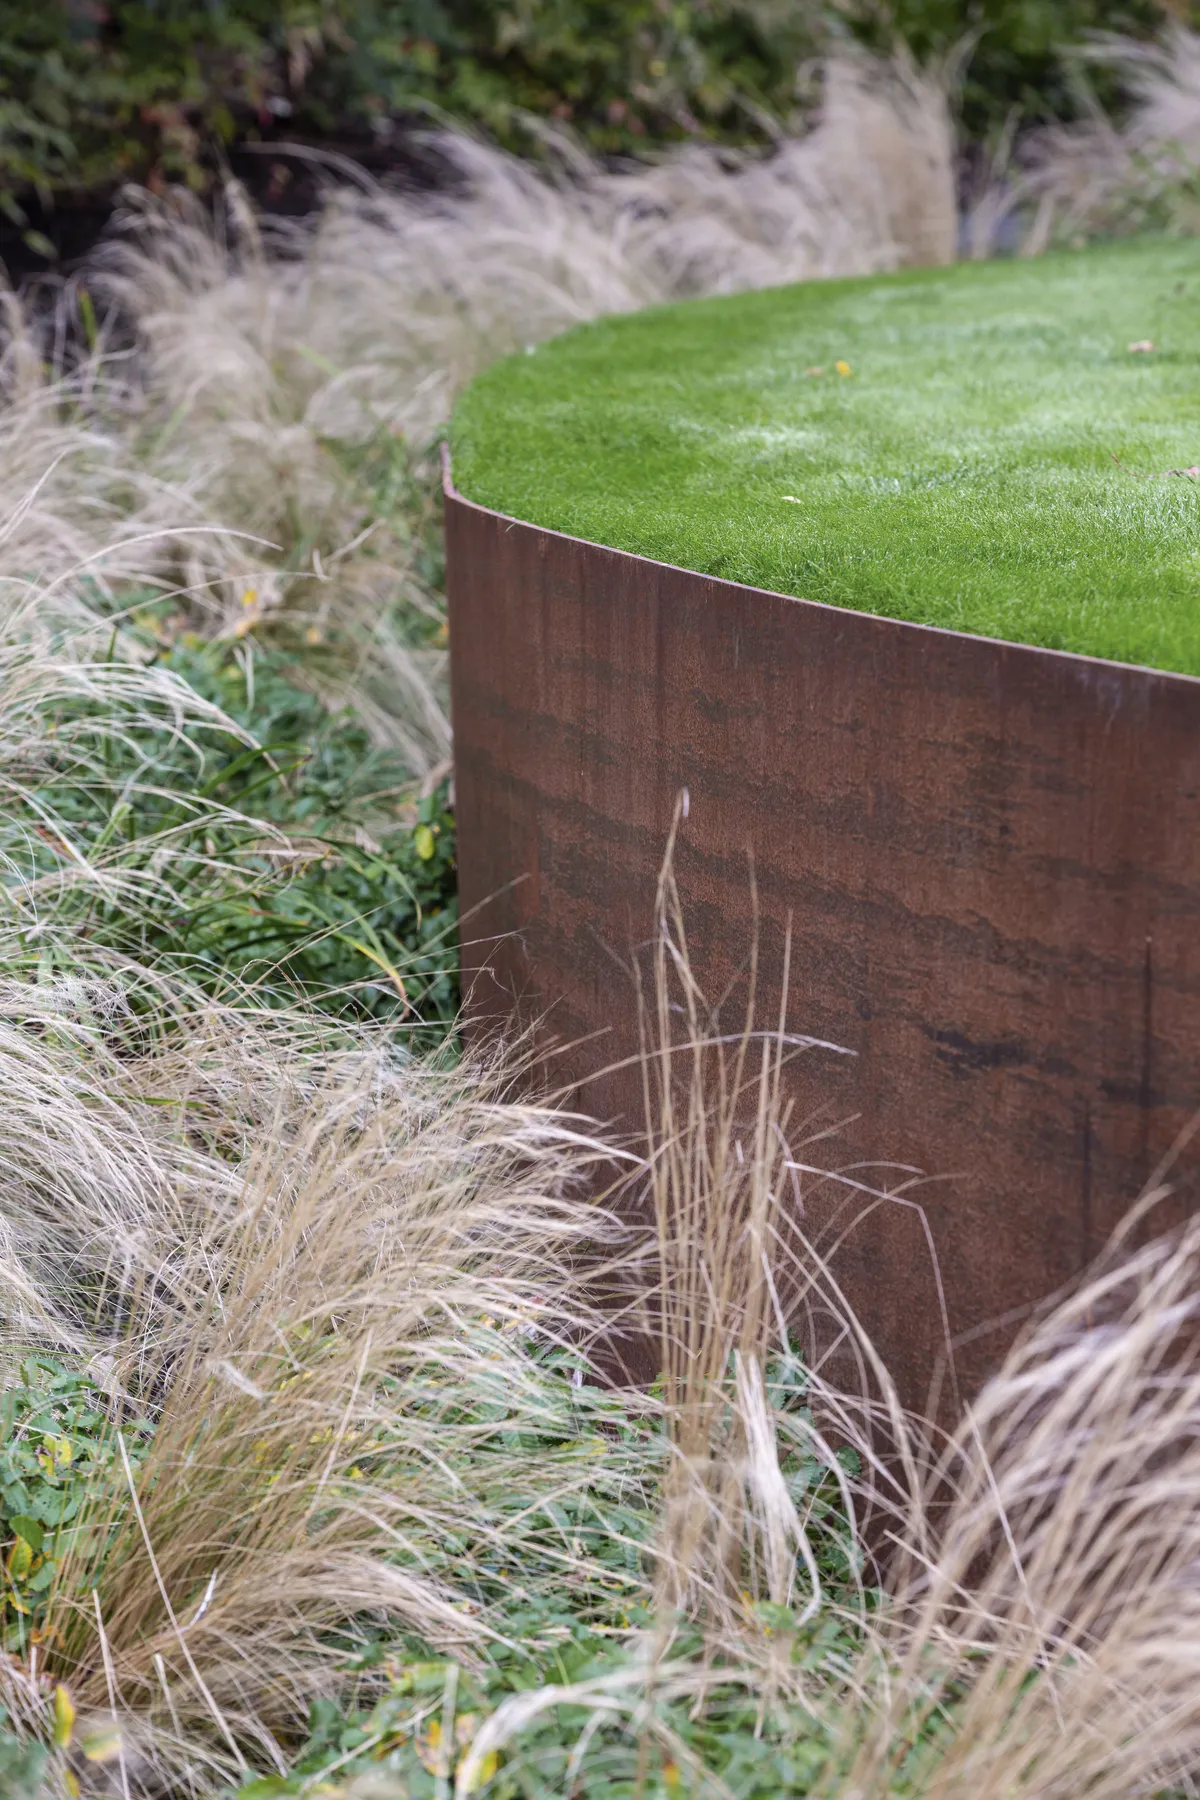 The flat lawn, created with “golf course technology” (and excellent drainage) is kept aloft by a retaining wall of rusted Corten steel. The curve is held in place by steel fins, anchored into concrete foundations. As the grey brick path descends around the side, the rusted vertical becomes more noticeably a backdrop to the changing hues of Stipa tenuissima, as well as Panicum virgatum ‘Rehbraun’ and Sanguisorba ‘Tanna’.